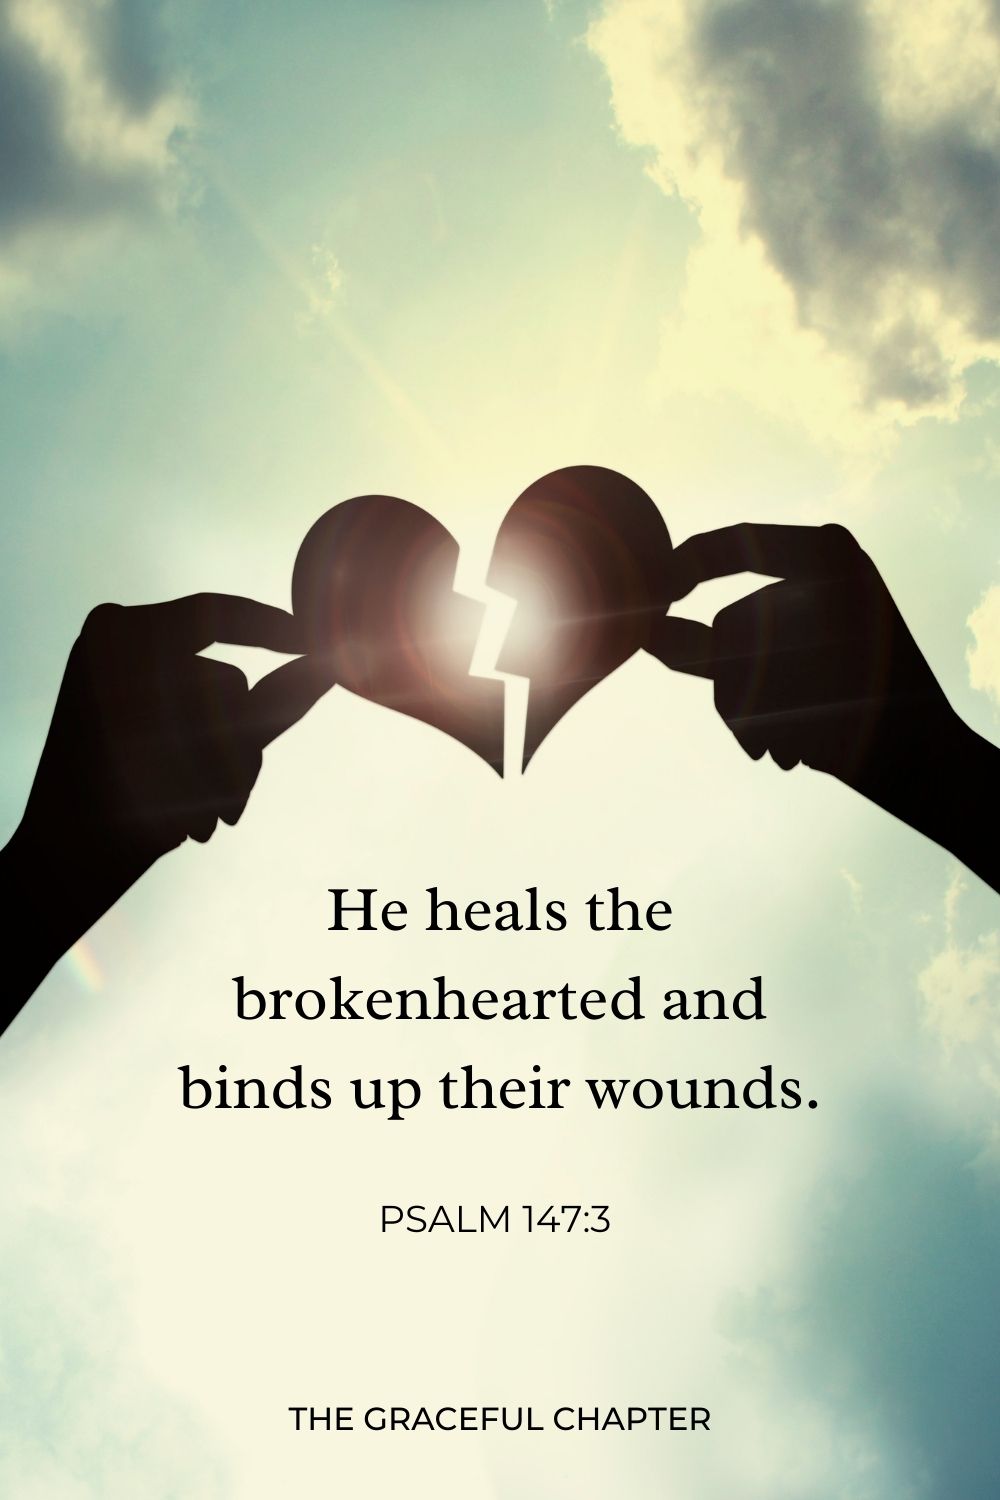 He heals the brokenhearted and binds up their wounds. Psalm 147:3